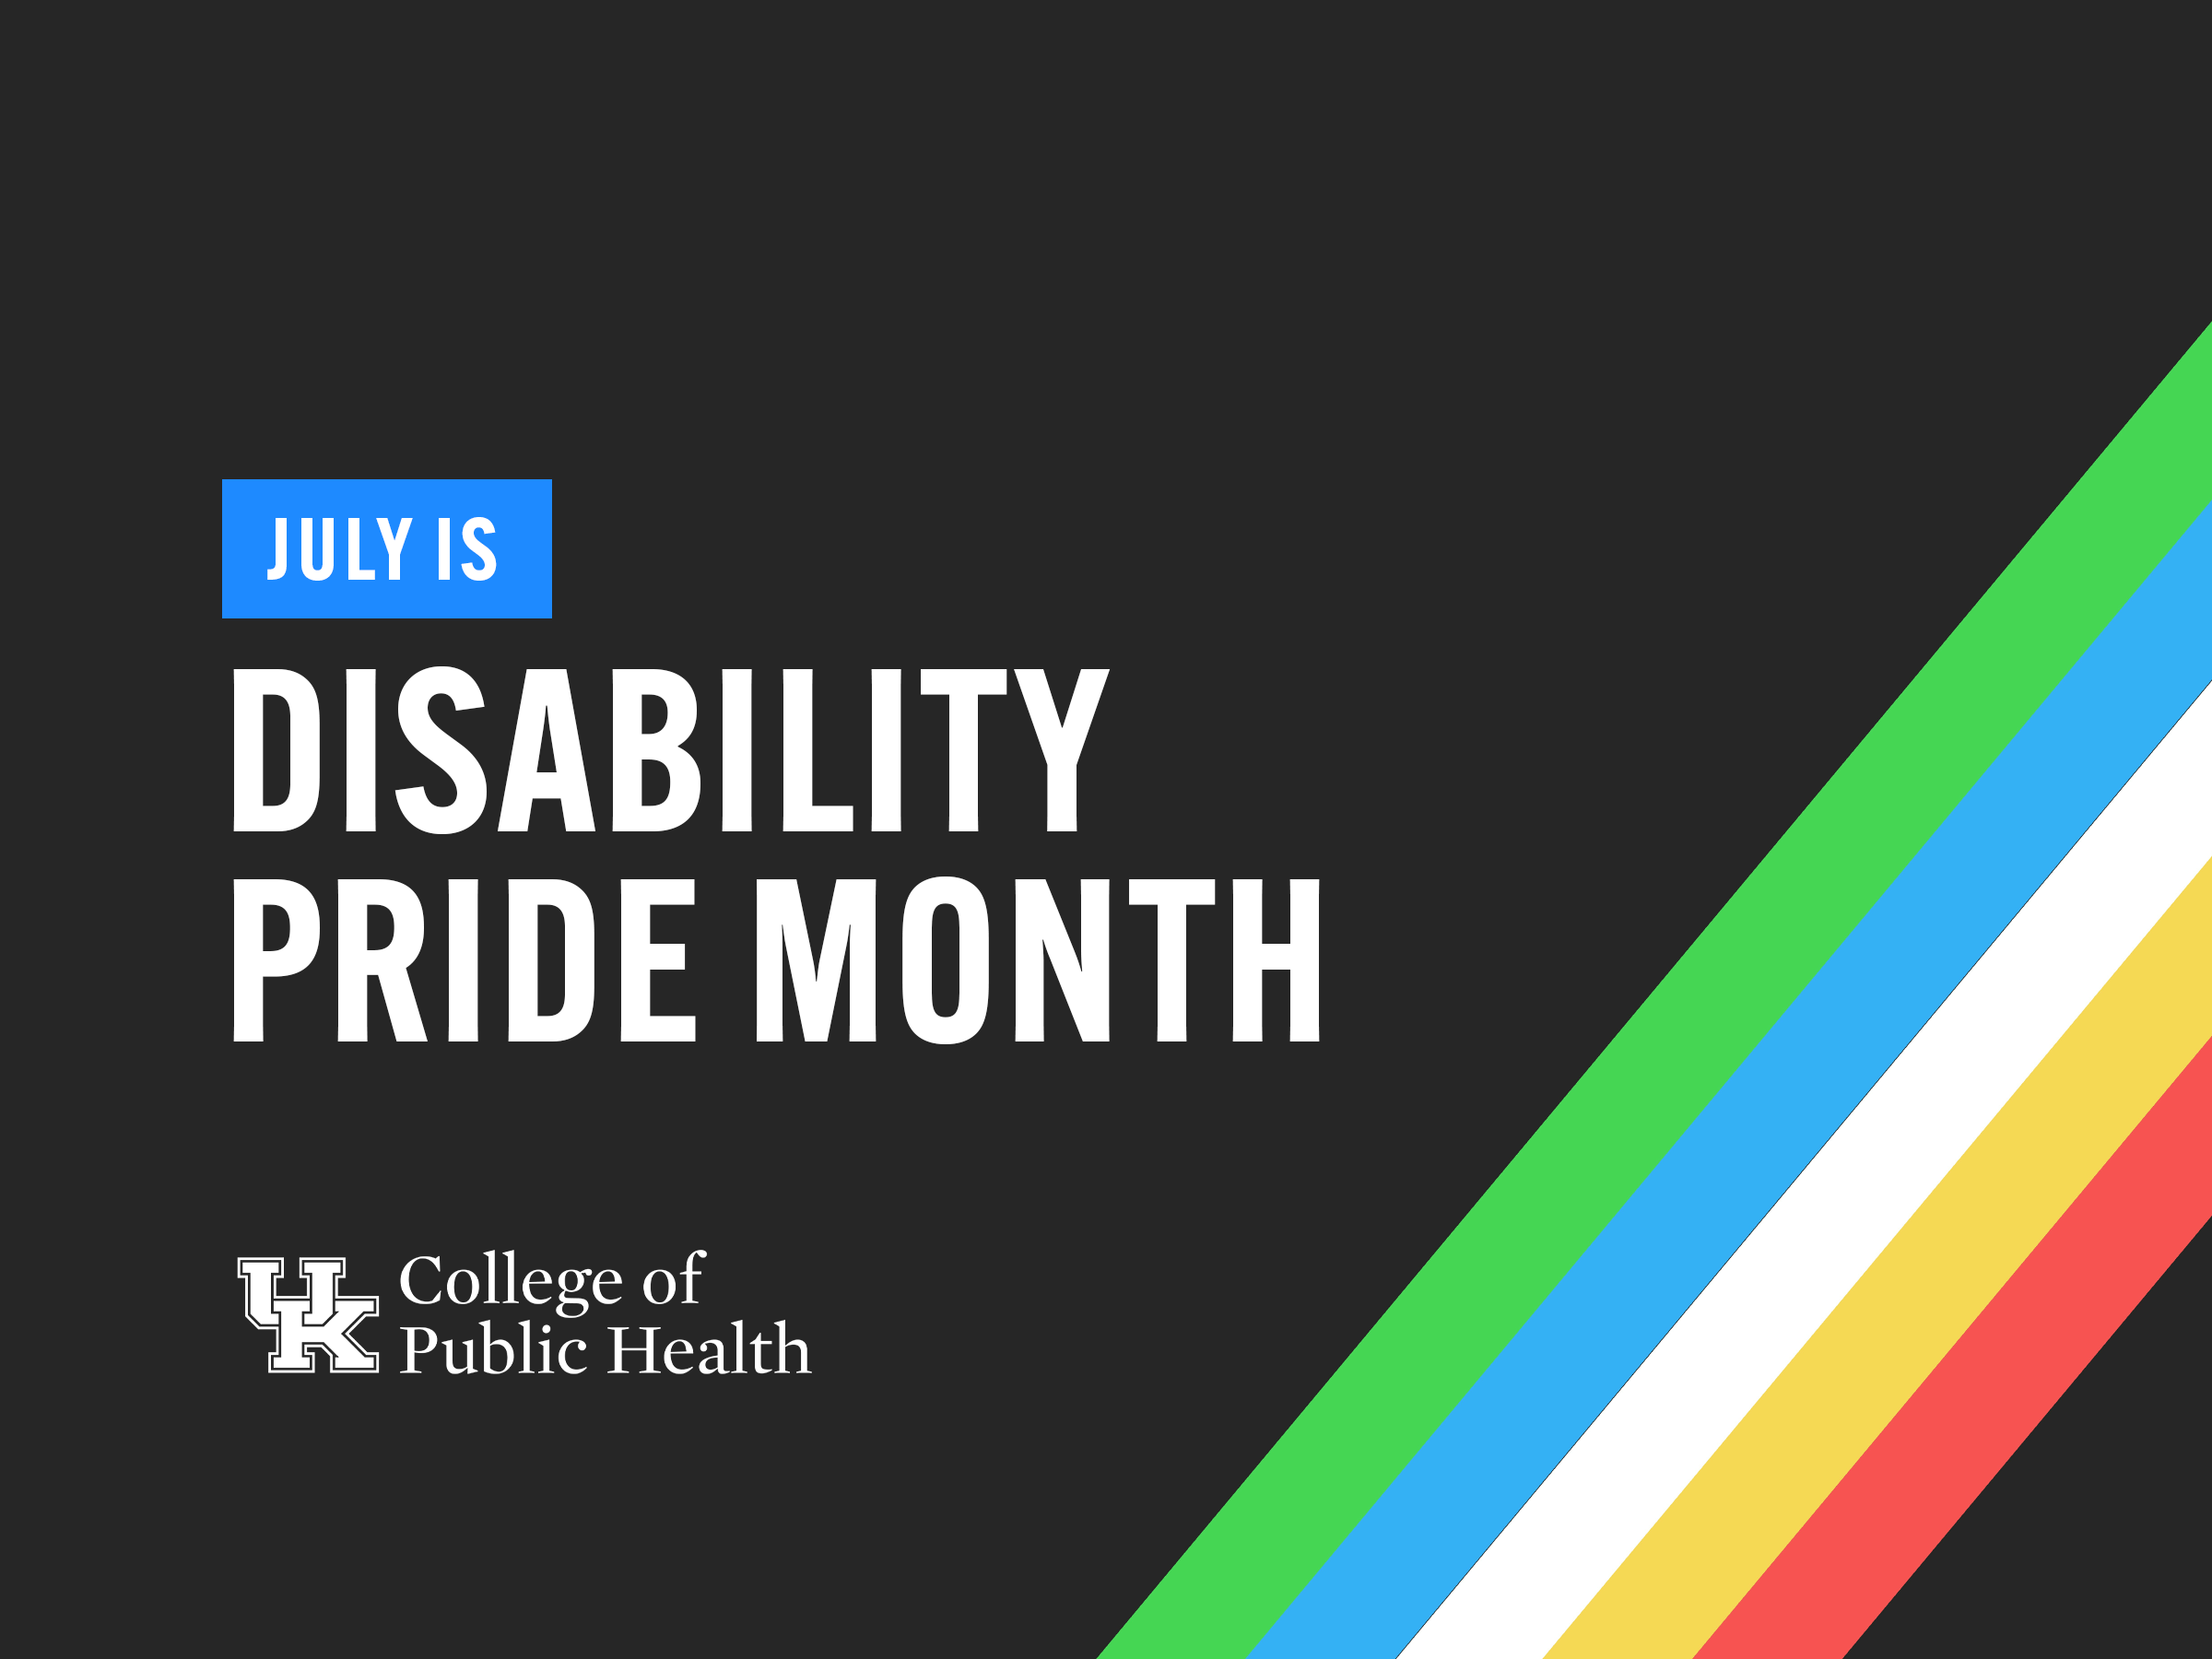 an illustration for disability pride month